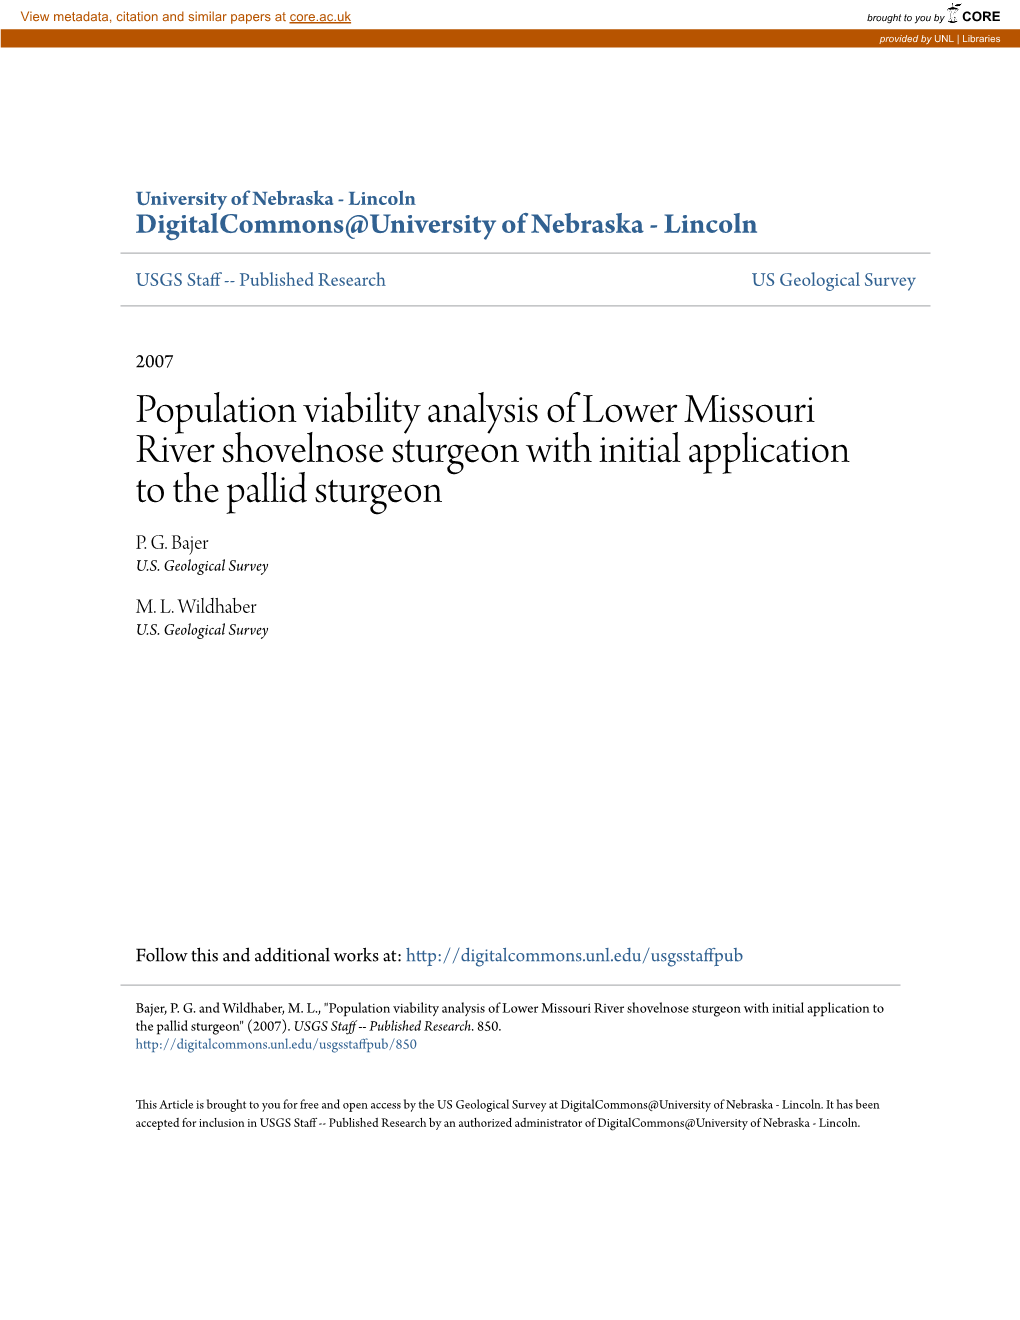 Population Viability Analysis of Lower Missouri River Shovelnose Sturgeon with Initial Application to the Pallid Sturgeon P